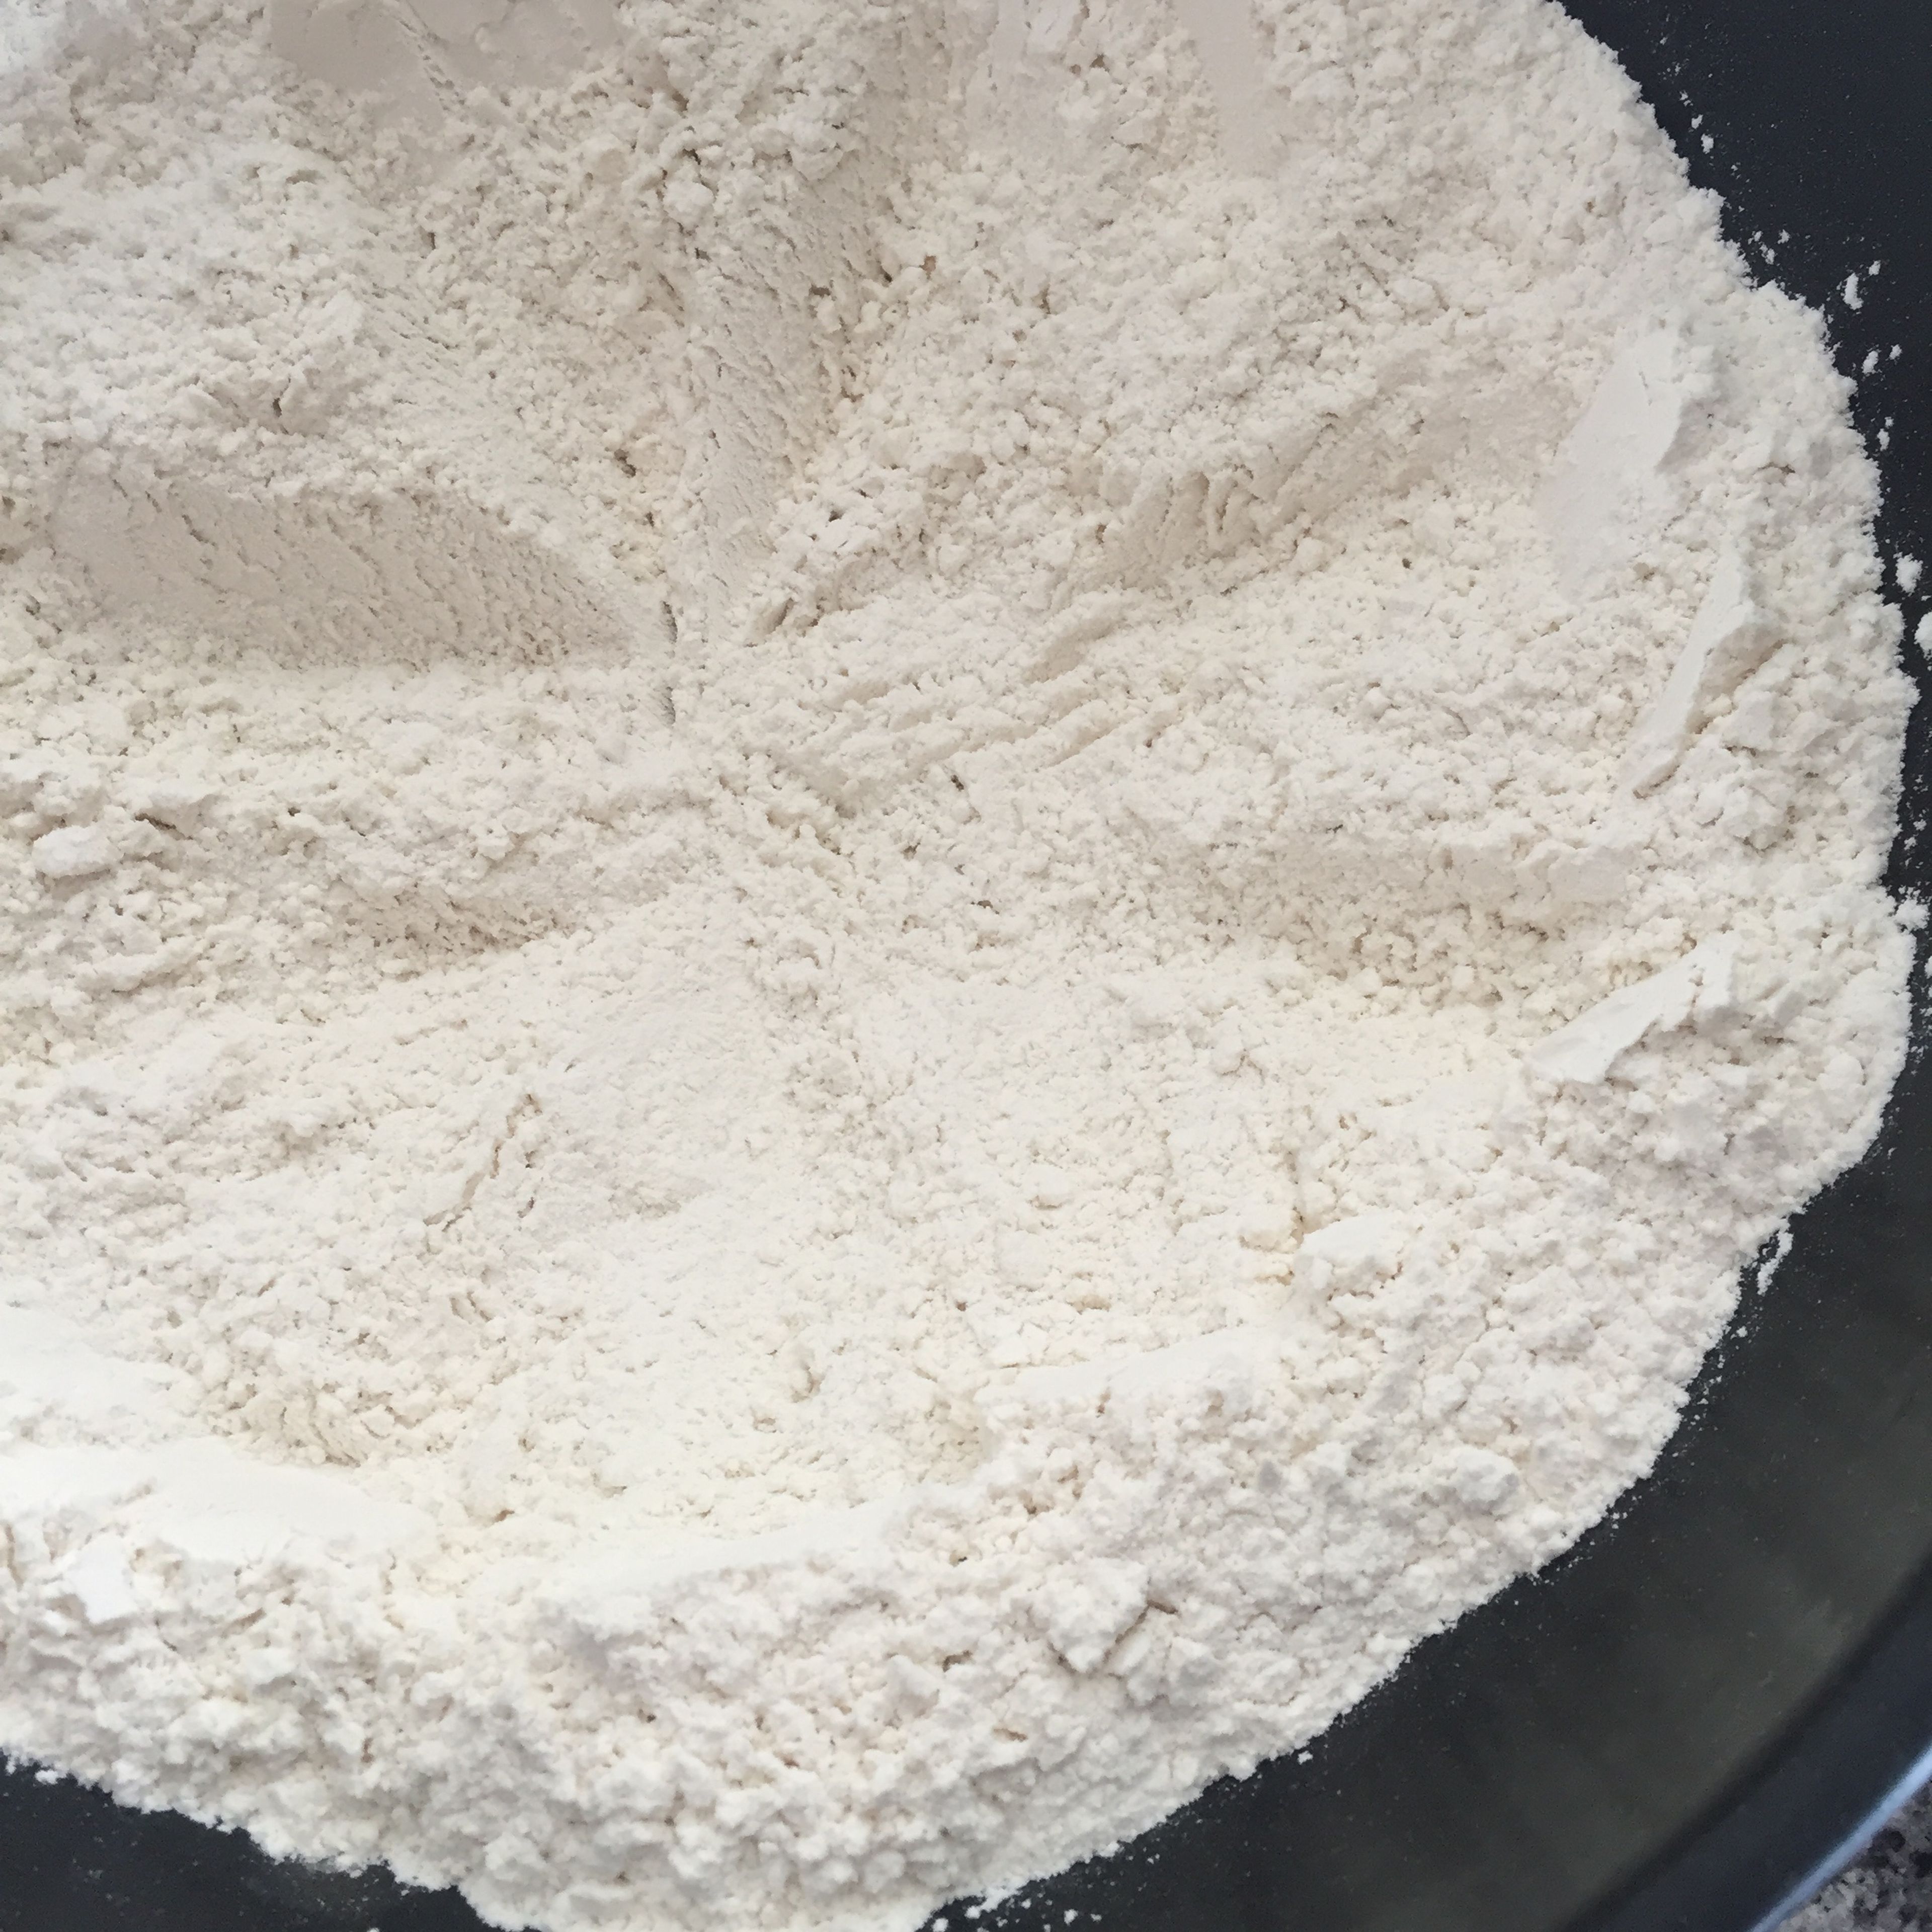 place flour in a bowl, and add a pinch of salt to it